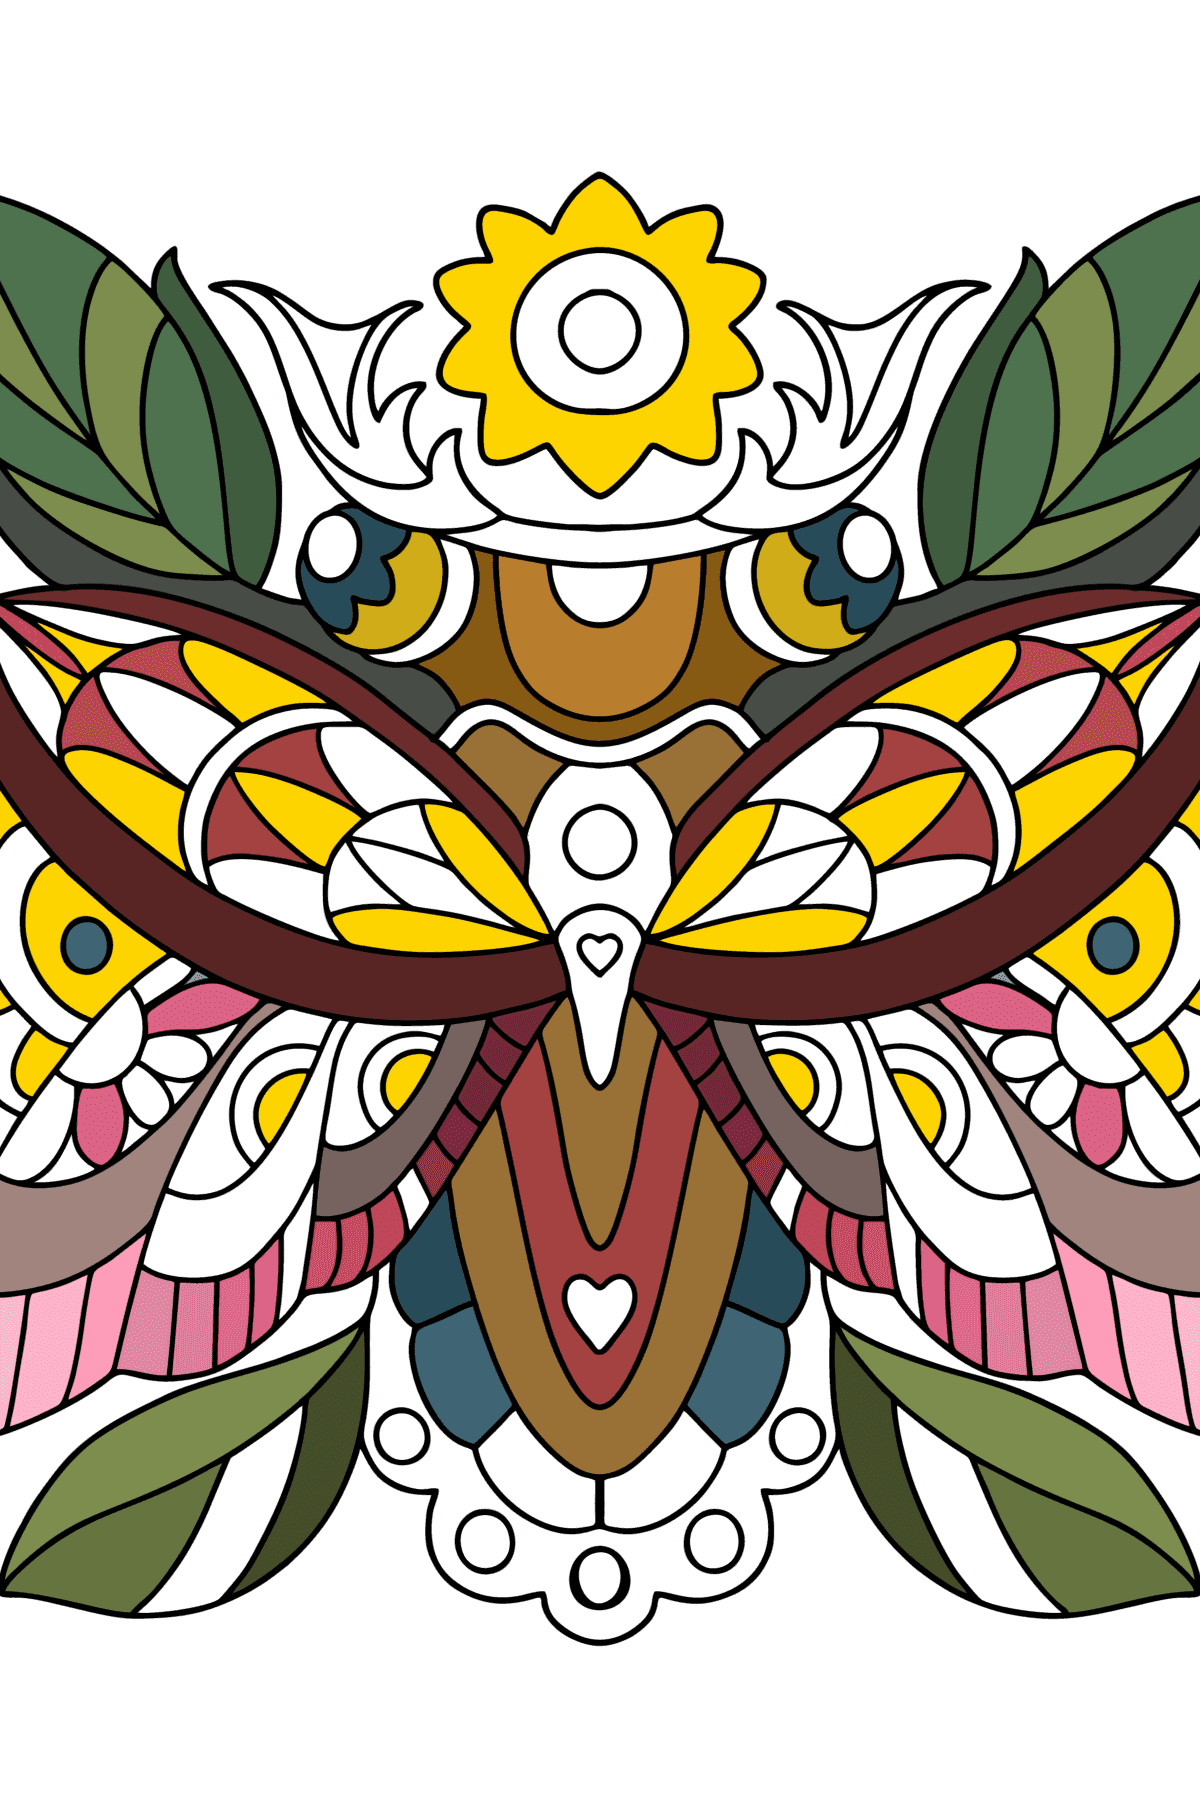 Stress relief Insect coloring page - Coloring Pages for Kids